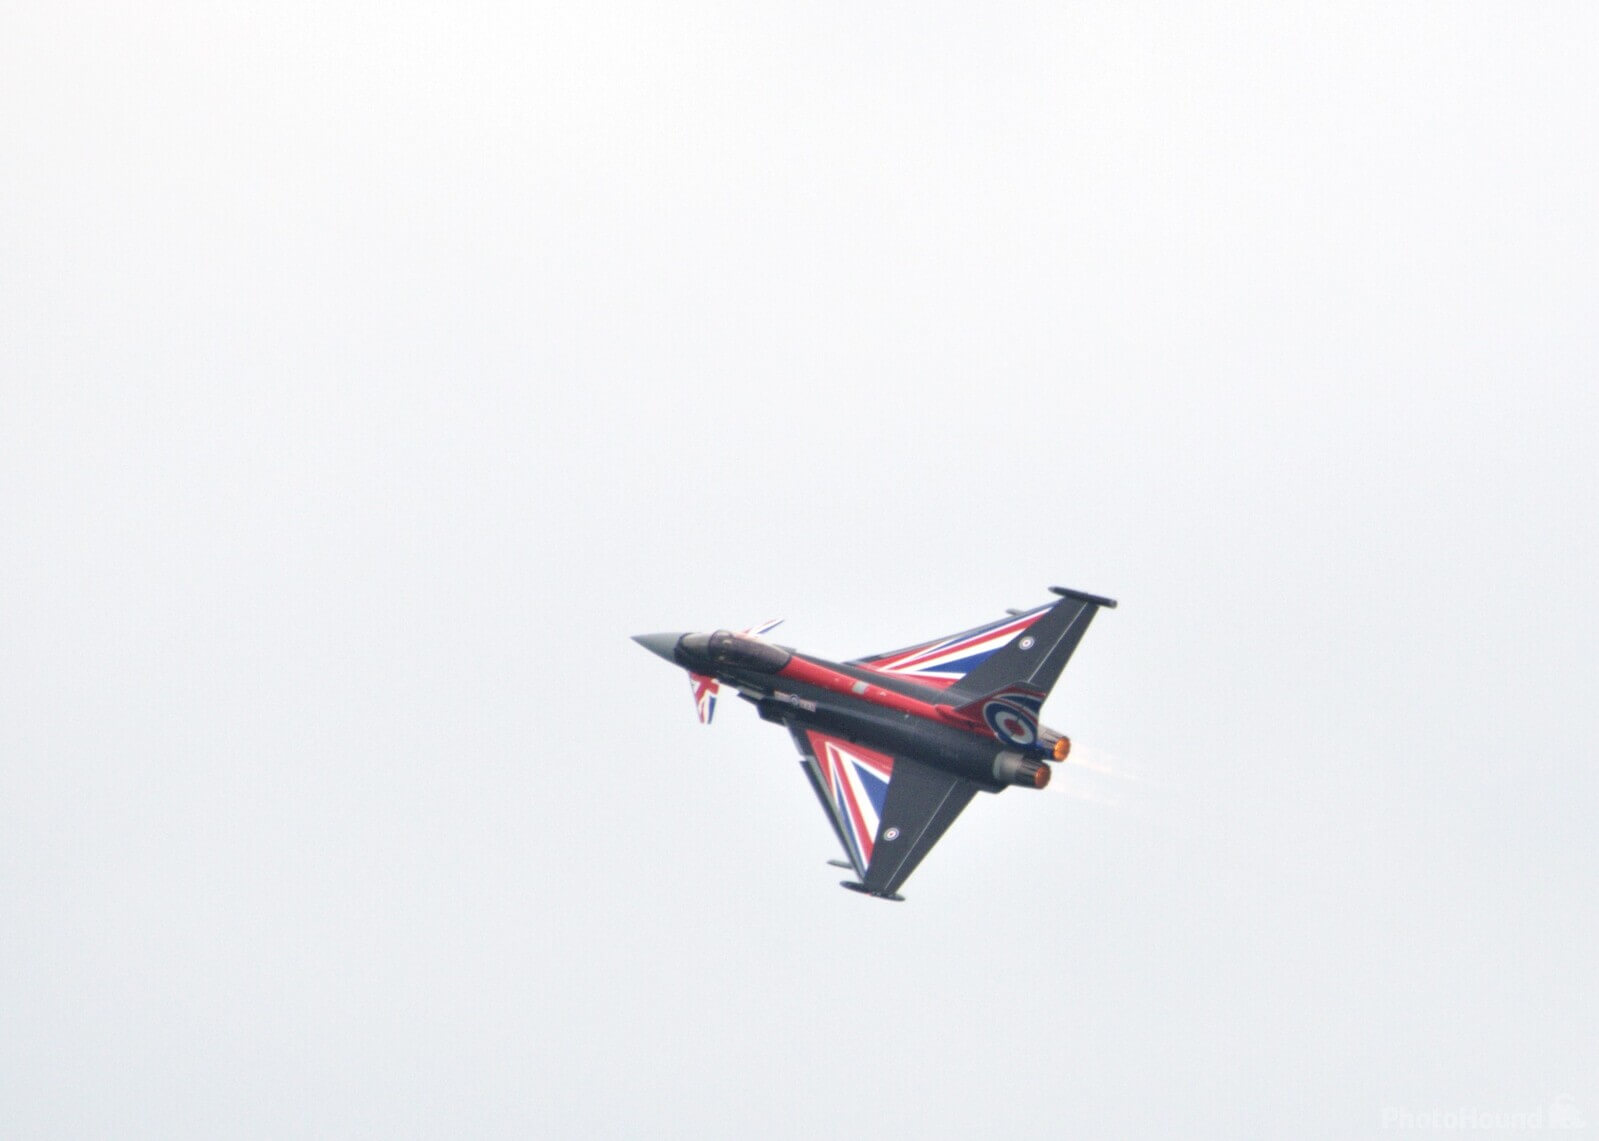 Image of Bournemouth Air Festival by michael bennett